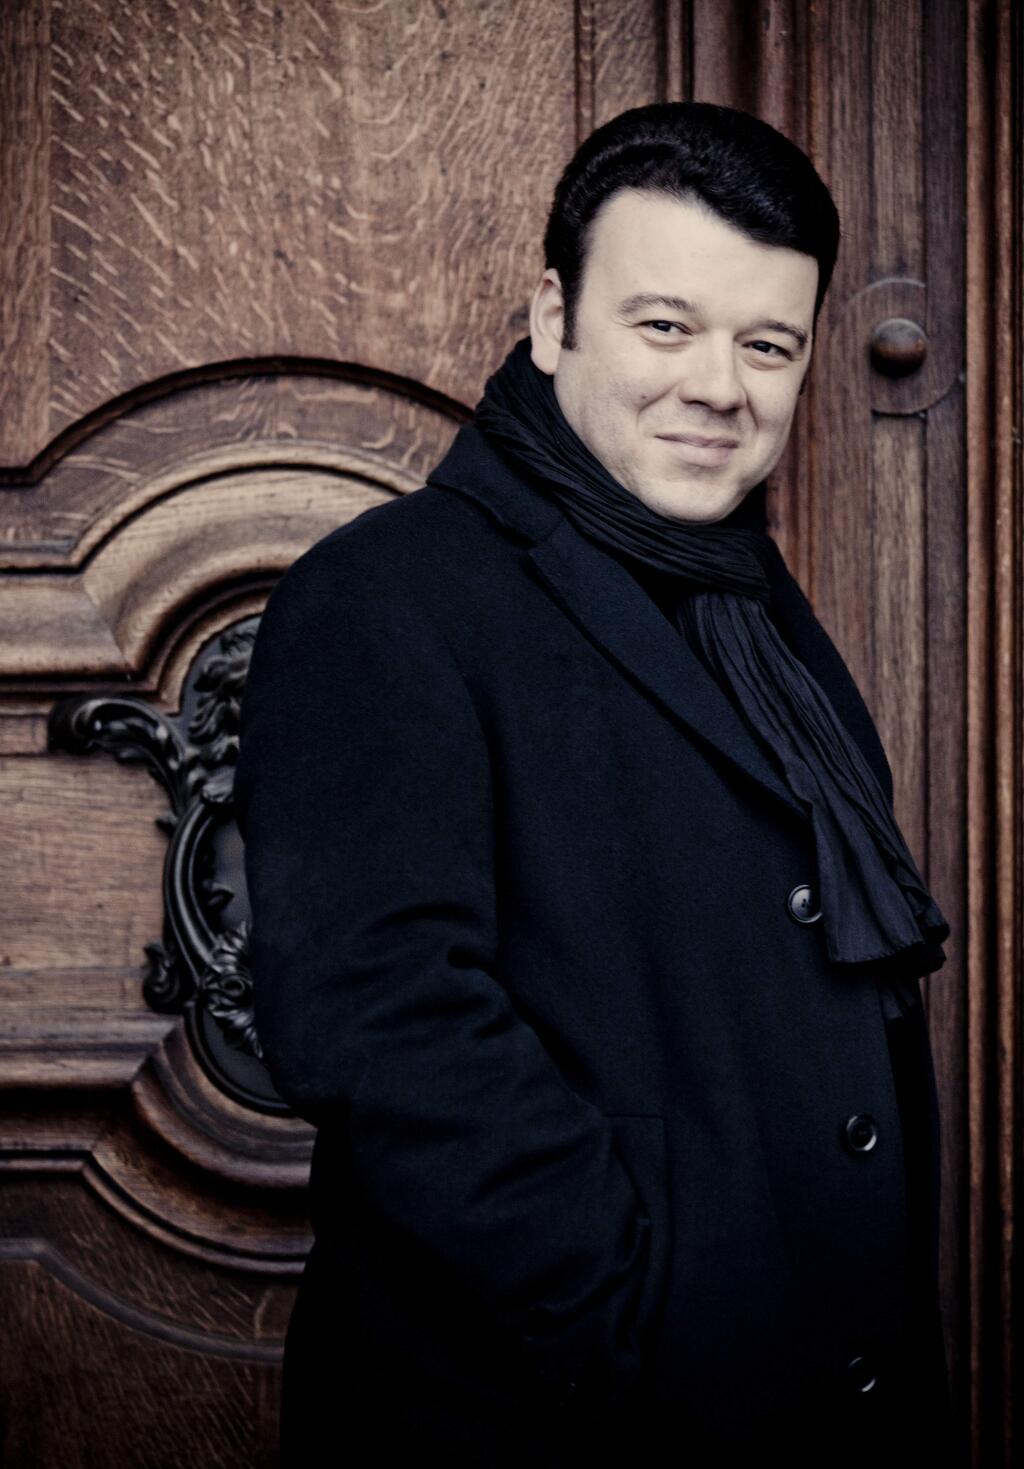 The Santa Rosa Symphony will host a free masterclass with Israeli violinist Vadim Gluzman at 4 p.m. Thursday, May 4, at Weill Hall that is open to the public. (Photo: Marco Borggreve)